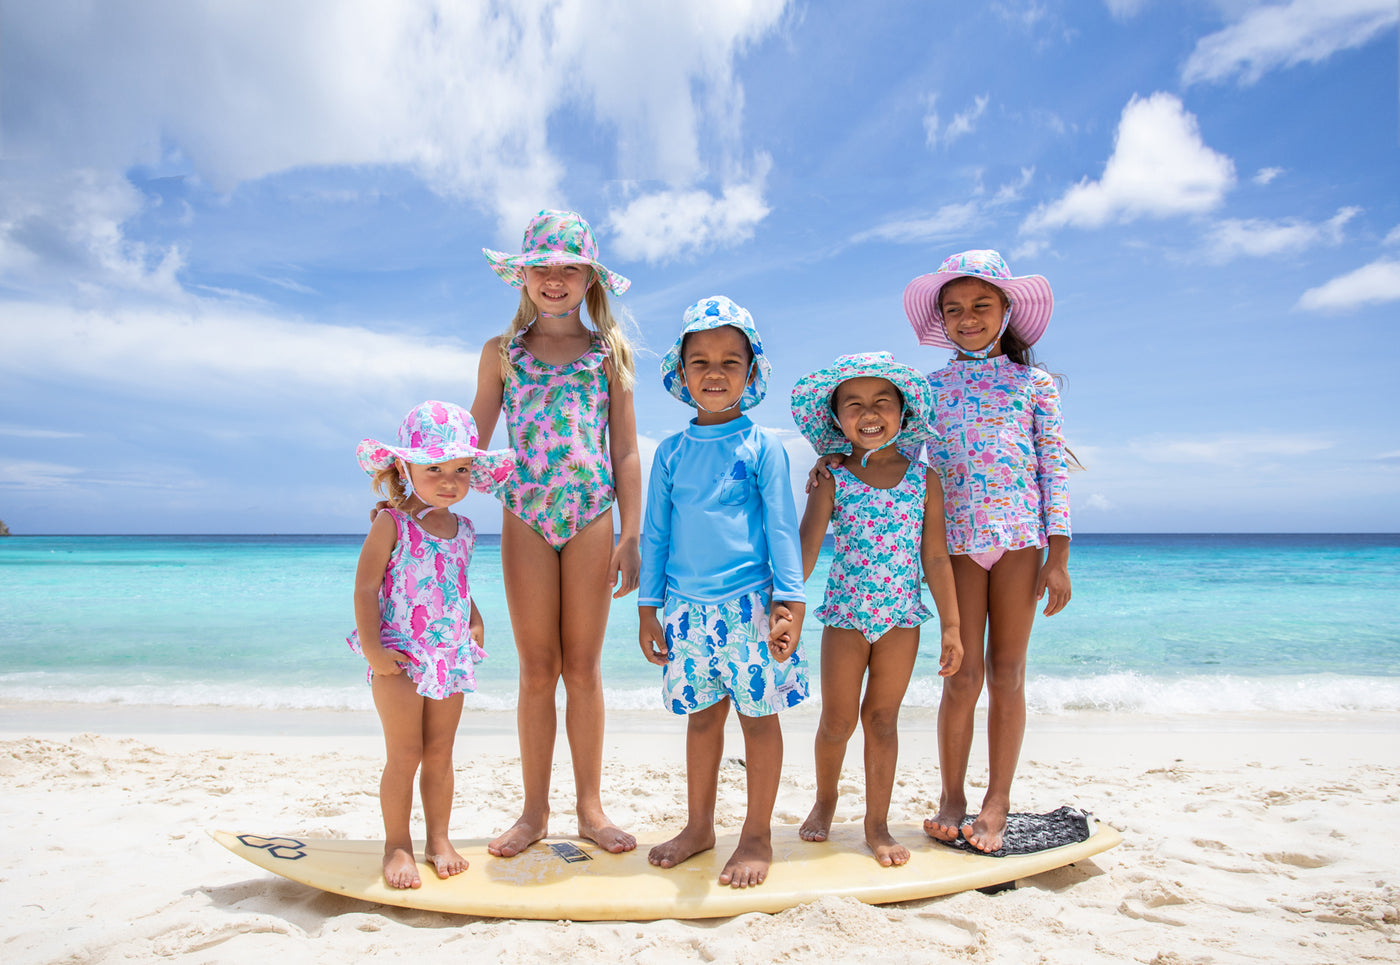 kids on the beach wearing flap happy hats and swimwear standing on the surf board at the beach